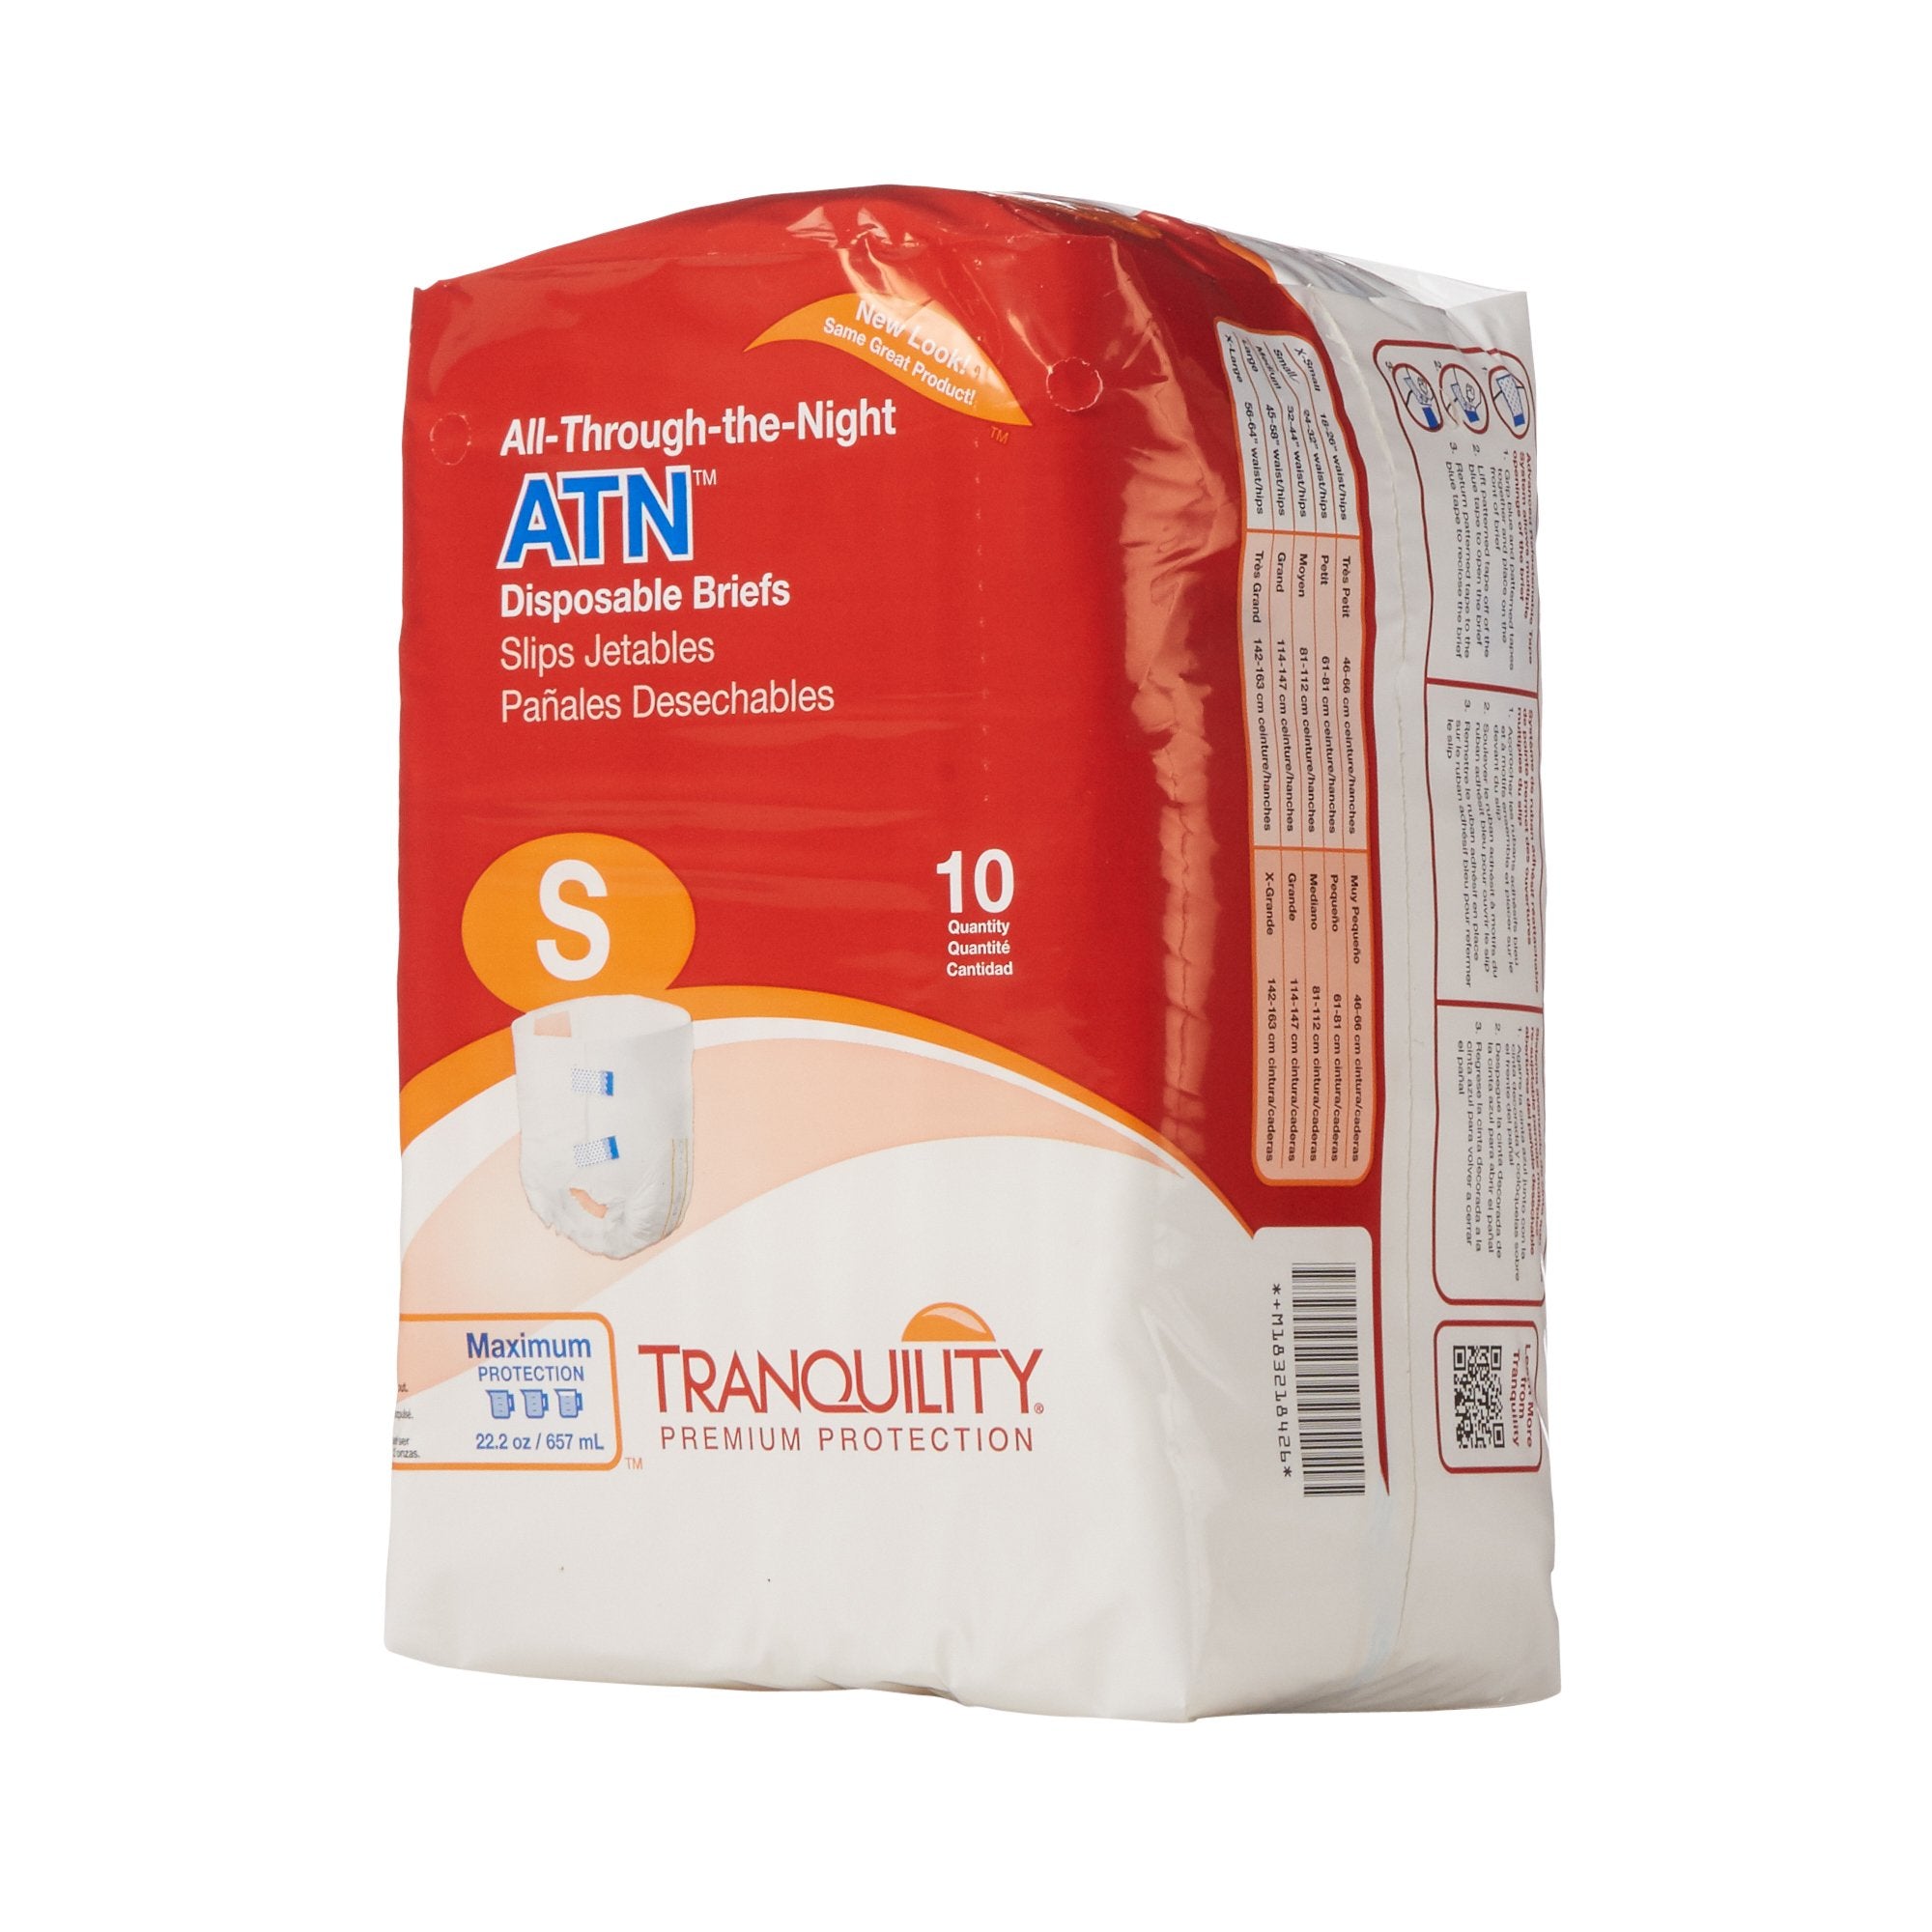 Unisex Adult Incontinence Brief Tranquility ATN Small Disposable Heavy Absorbency